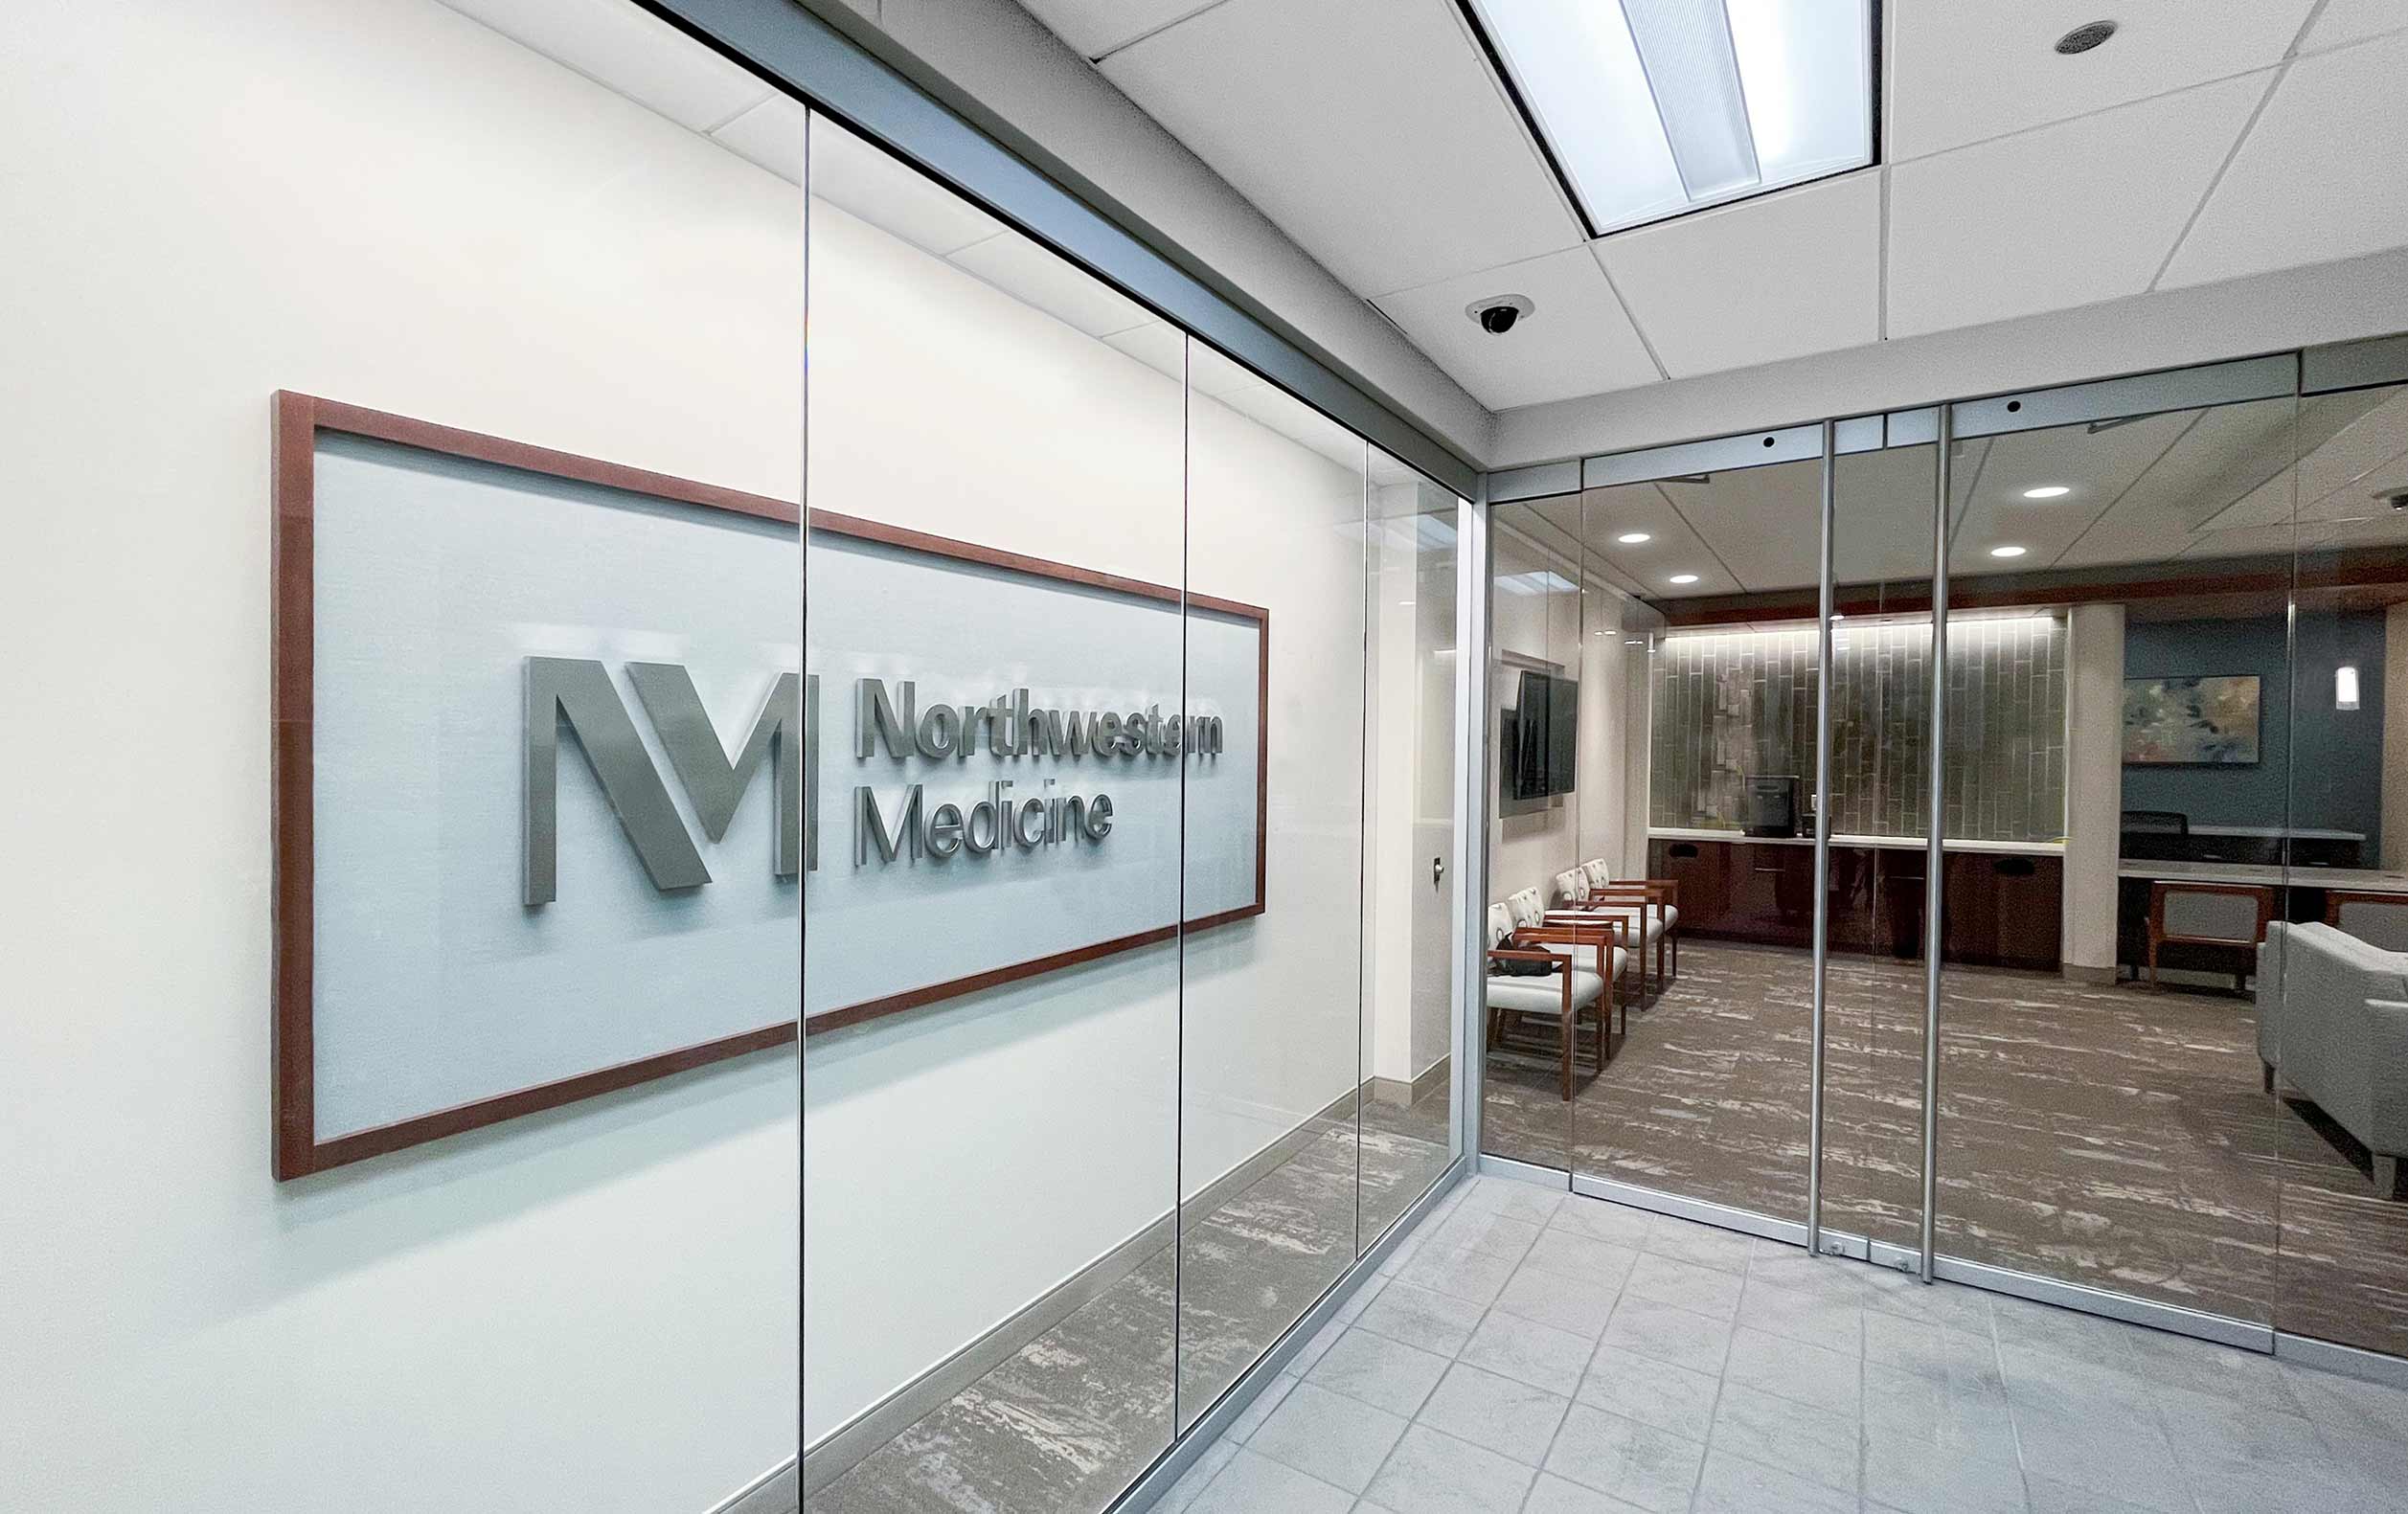 medical office space entry: Northwestern Medicine sign behind glass wall